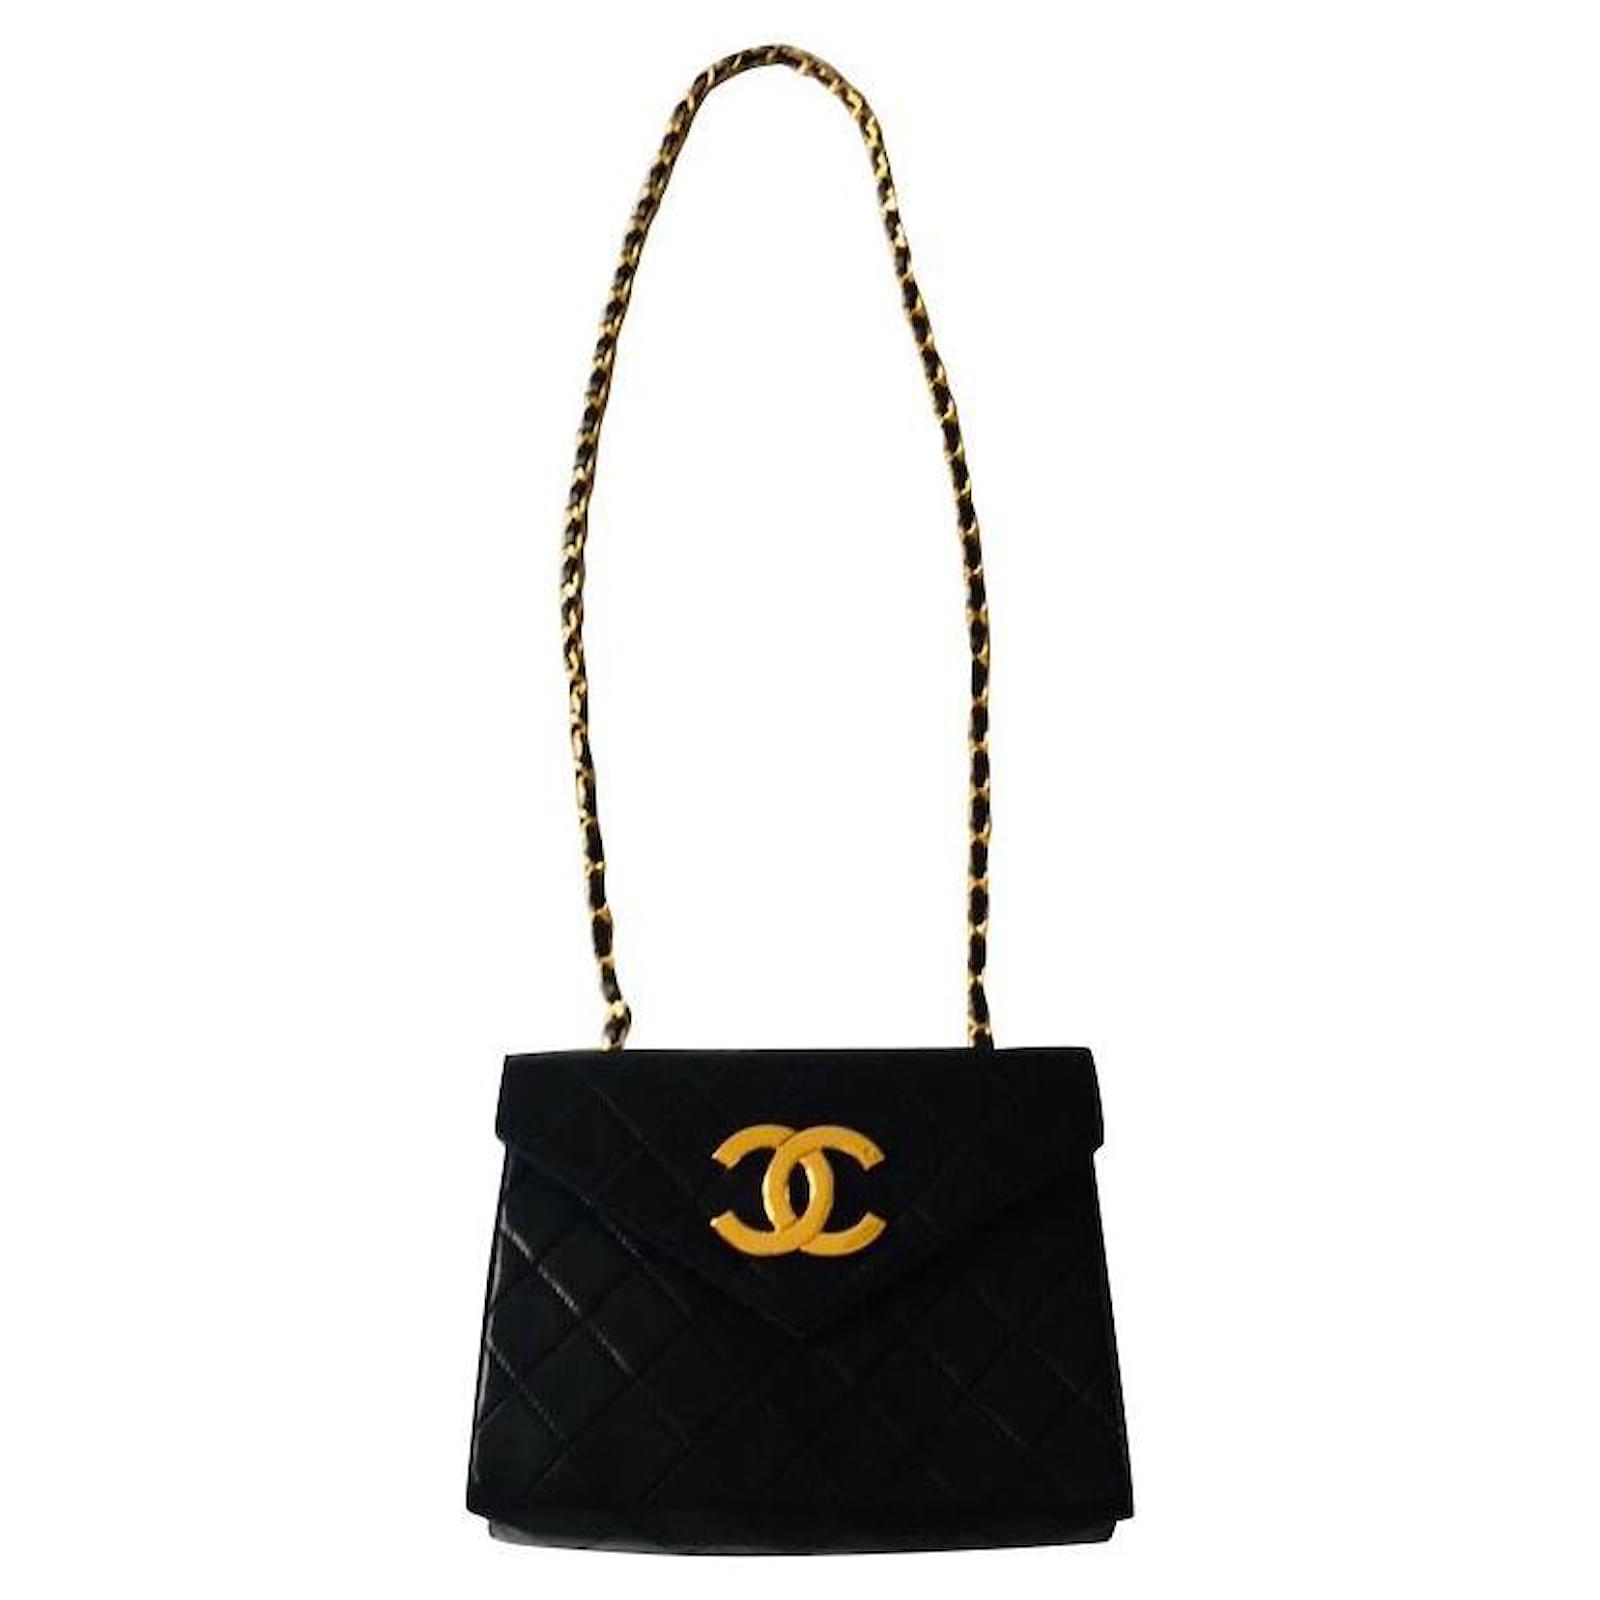 Chanel Vintage Chanel Black Caviar Quilted Leather Waist Pouch Gold